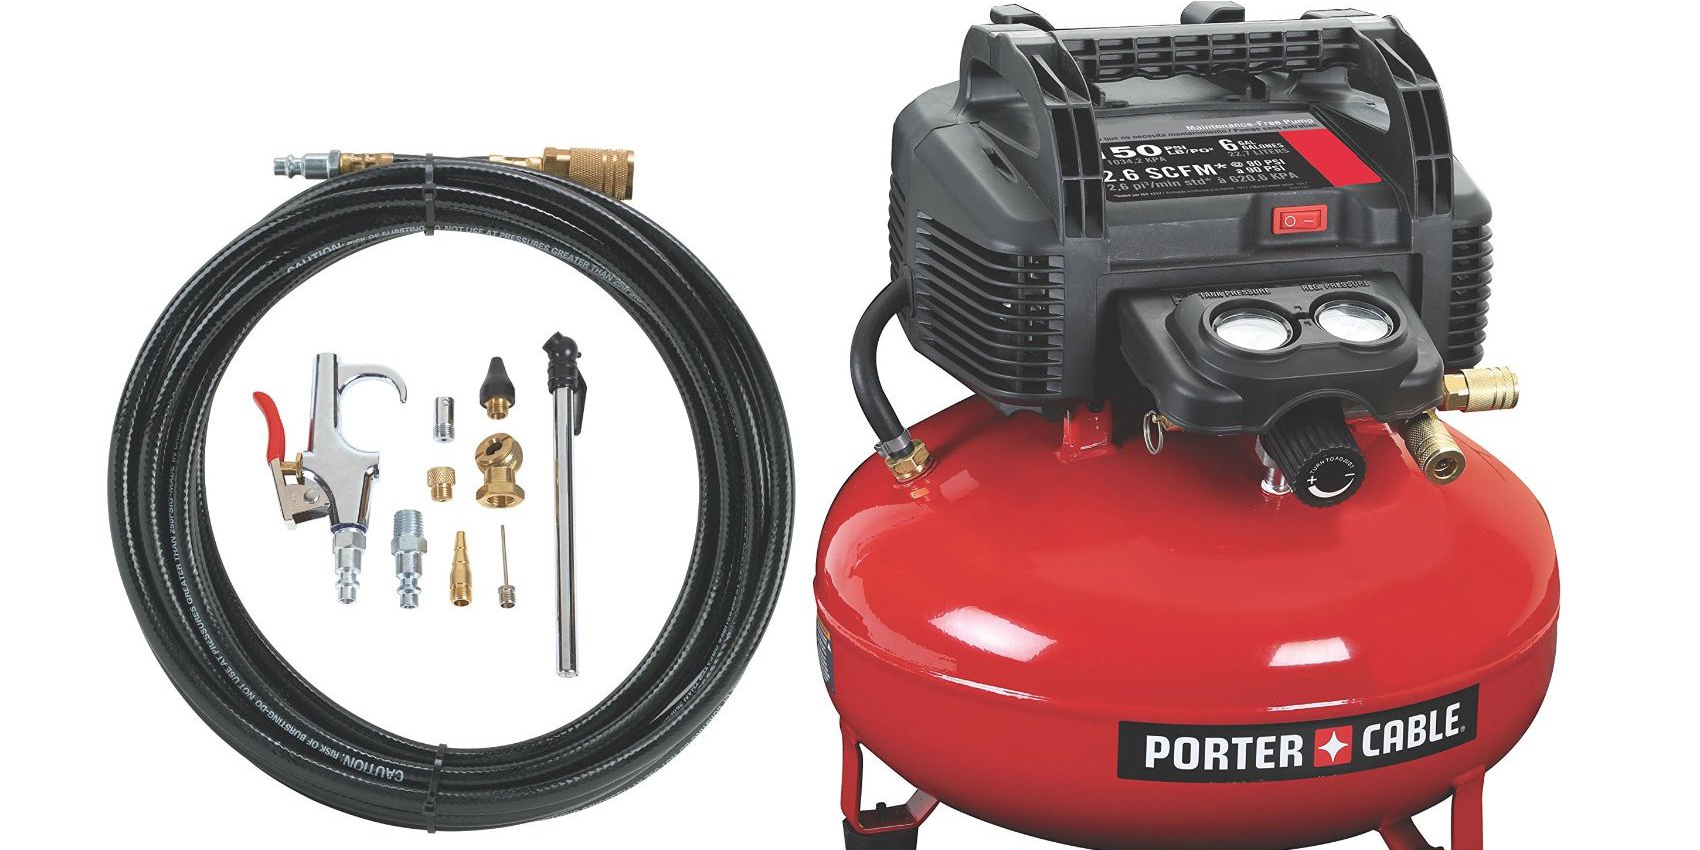 porter-cable-oil-free-umc-pancake-compressor-with-13-piece-accessory-kit-1